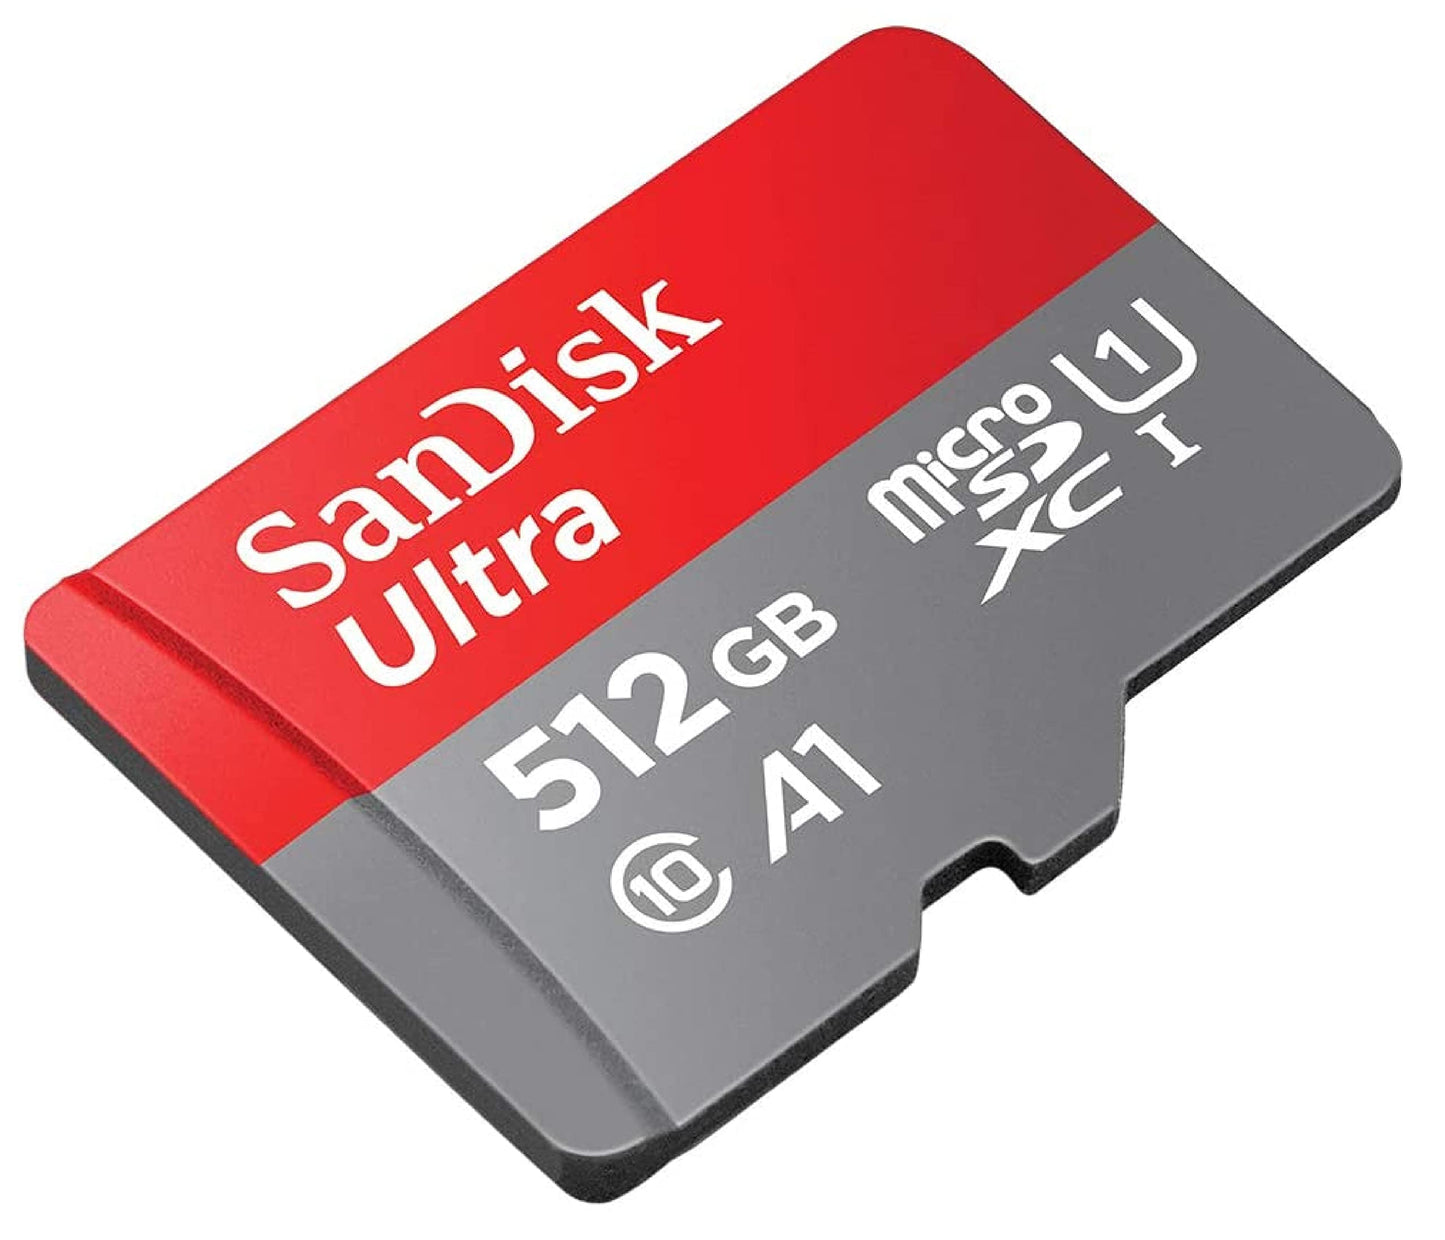 SanDisk Ultra 512GB UHS-I MicroSD Card Works with Insta360 Action Camera ONE RS 1-Inch 360 (SDSQUAC-512G-GN6MN) U1 A1 Class 10 Bundle with (1) Everything But Stromboli MicroSDXC Memory Card Reader